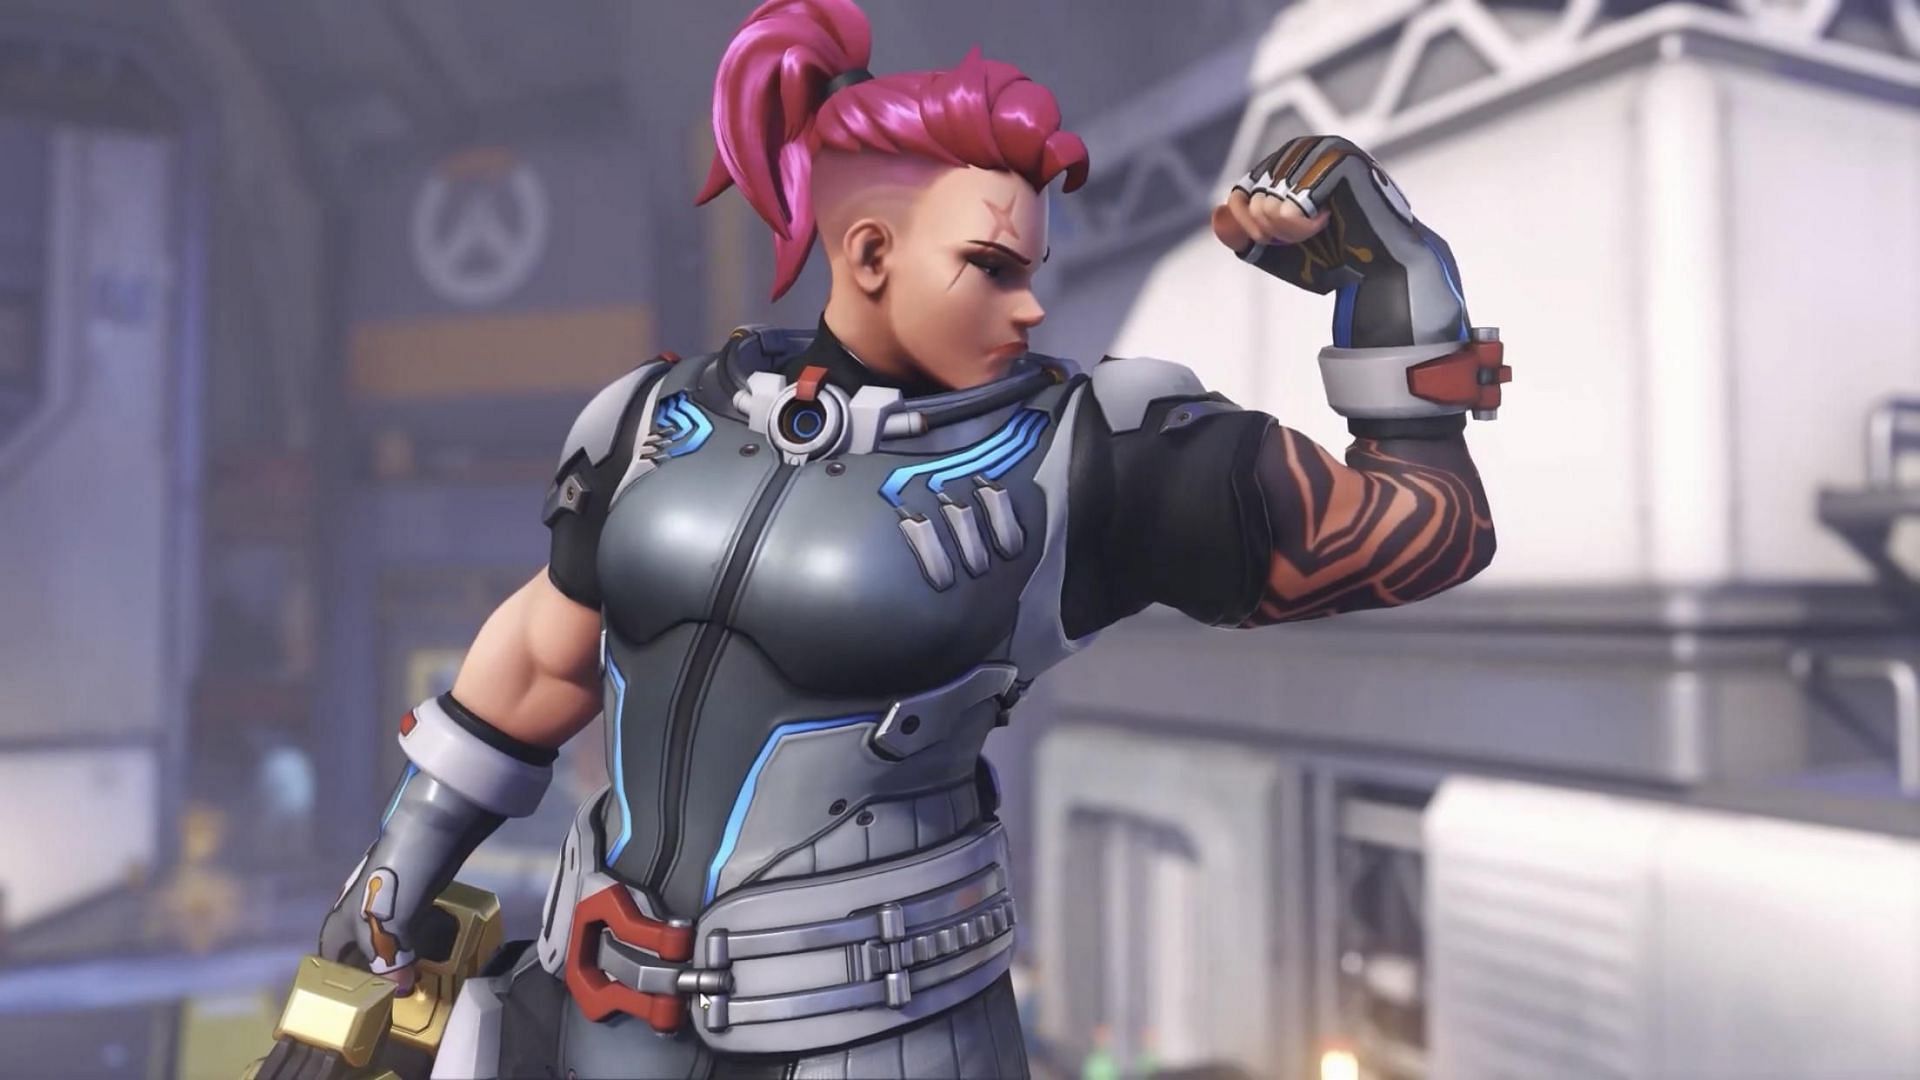 The redesigned version of Zarya in Overwatch 2 (Image via Blizzard Entertainment)